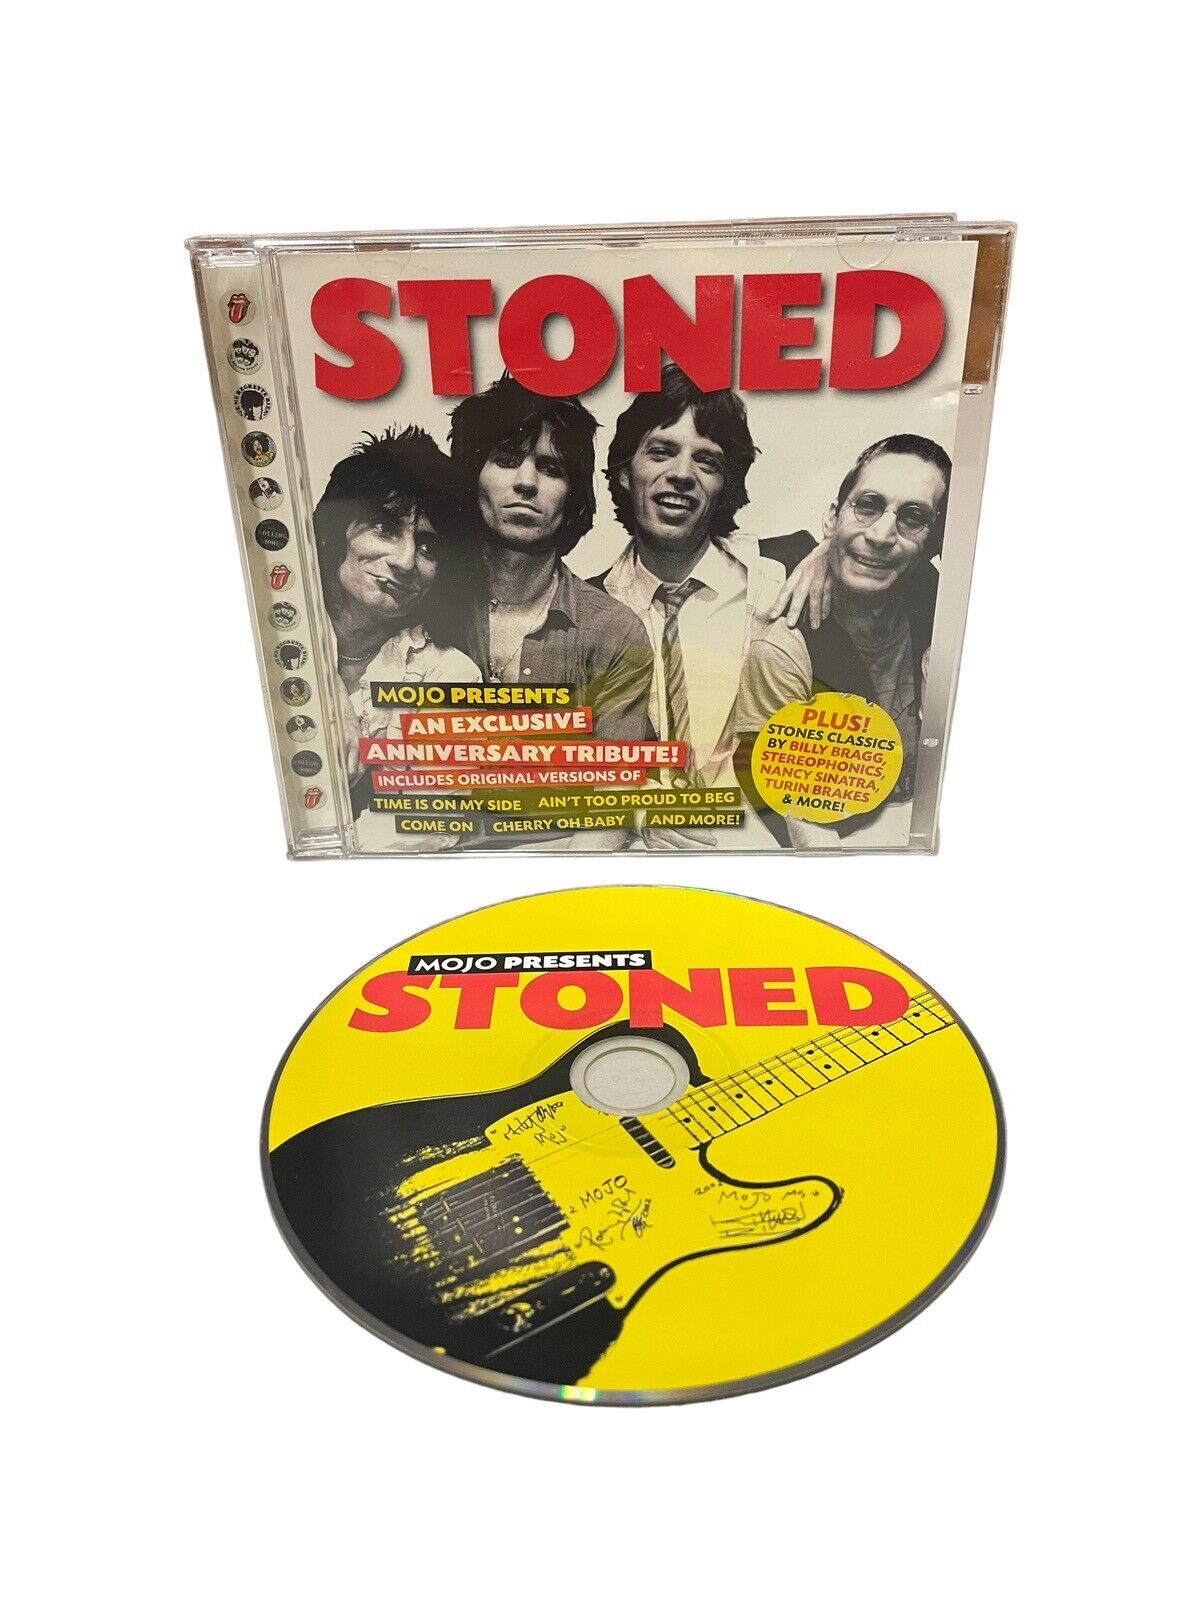 Mojo Presents Stoned An Exclusive Anniversary Tribute To The Rolling Stones CD